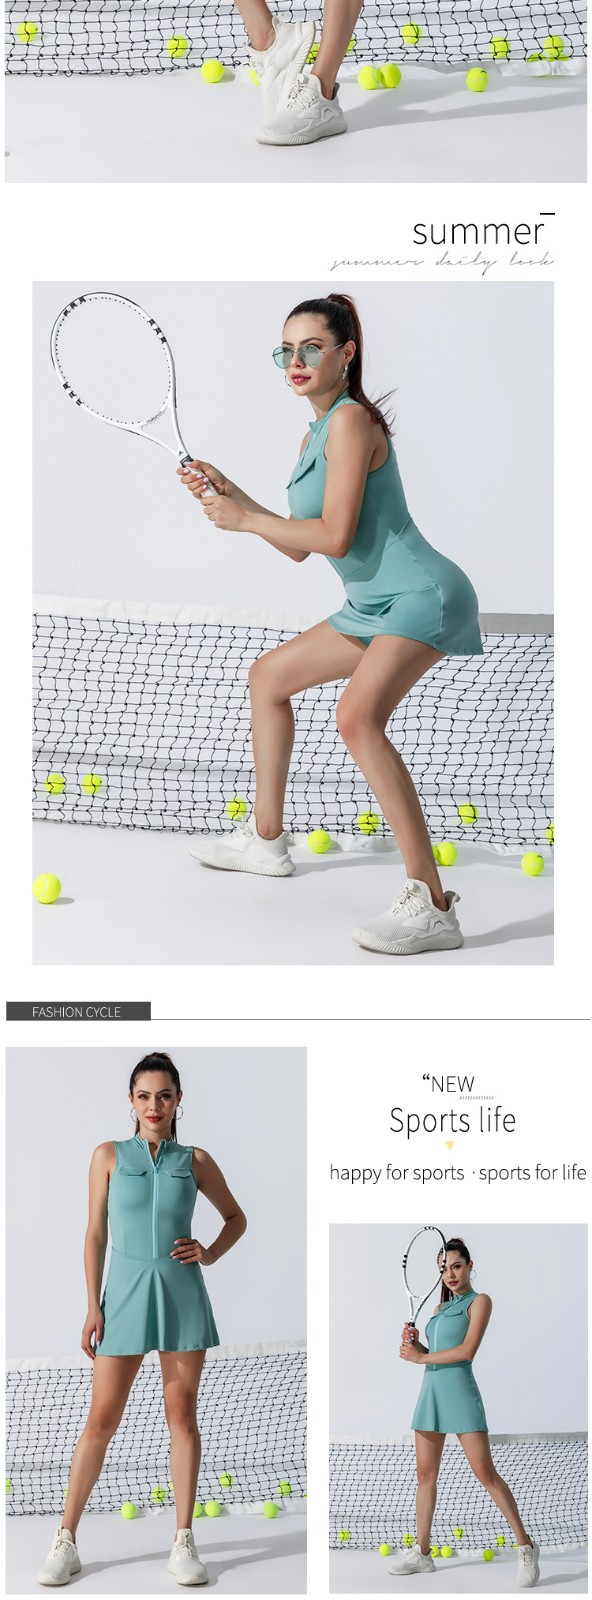 personalized women's tennis outfits experts-5